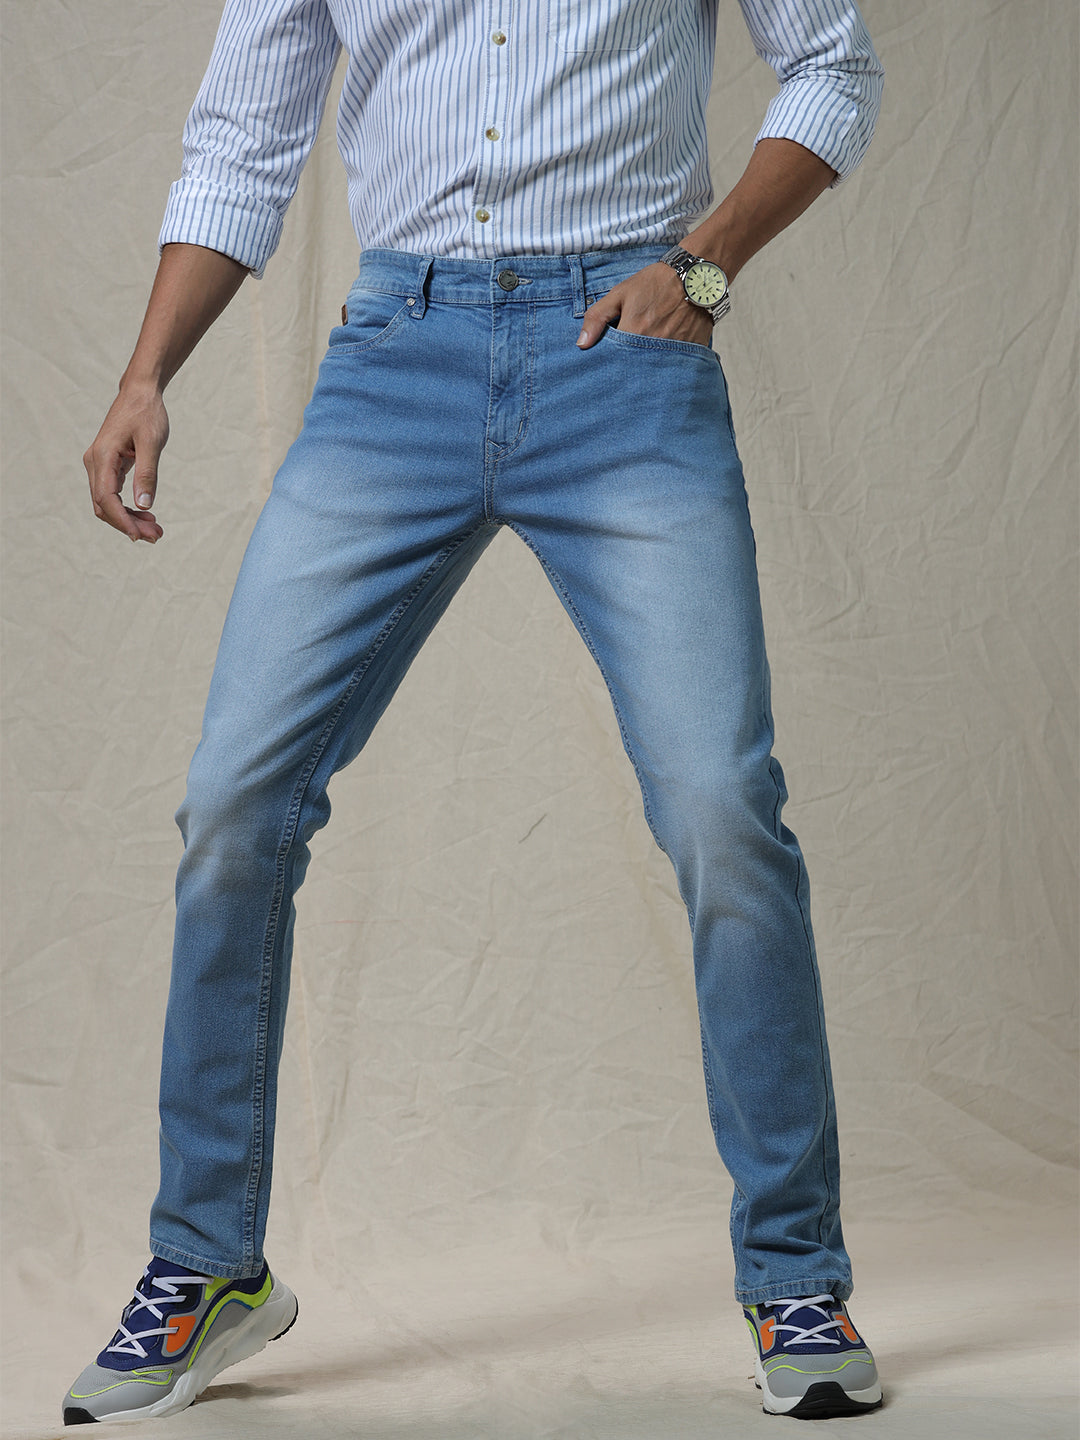 Classic Rodeo Blue Jeans